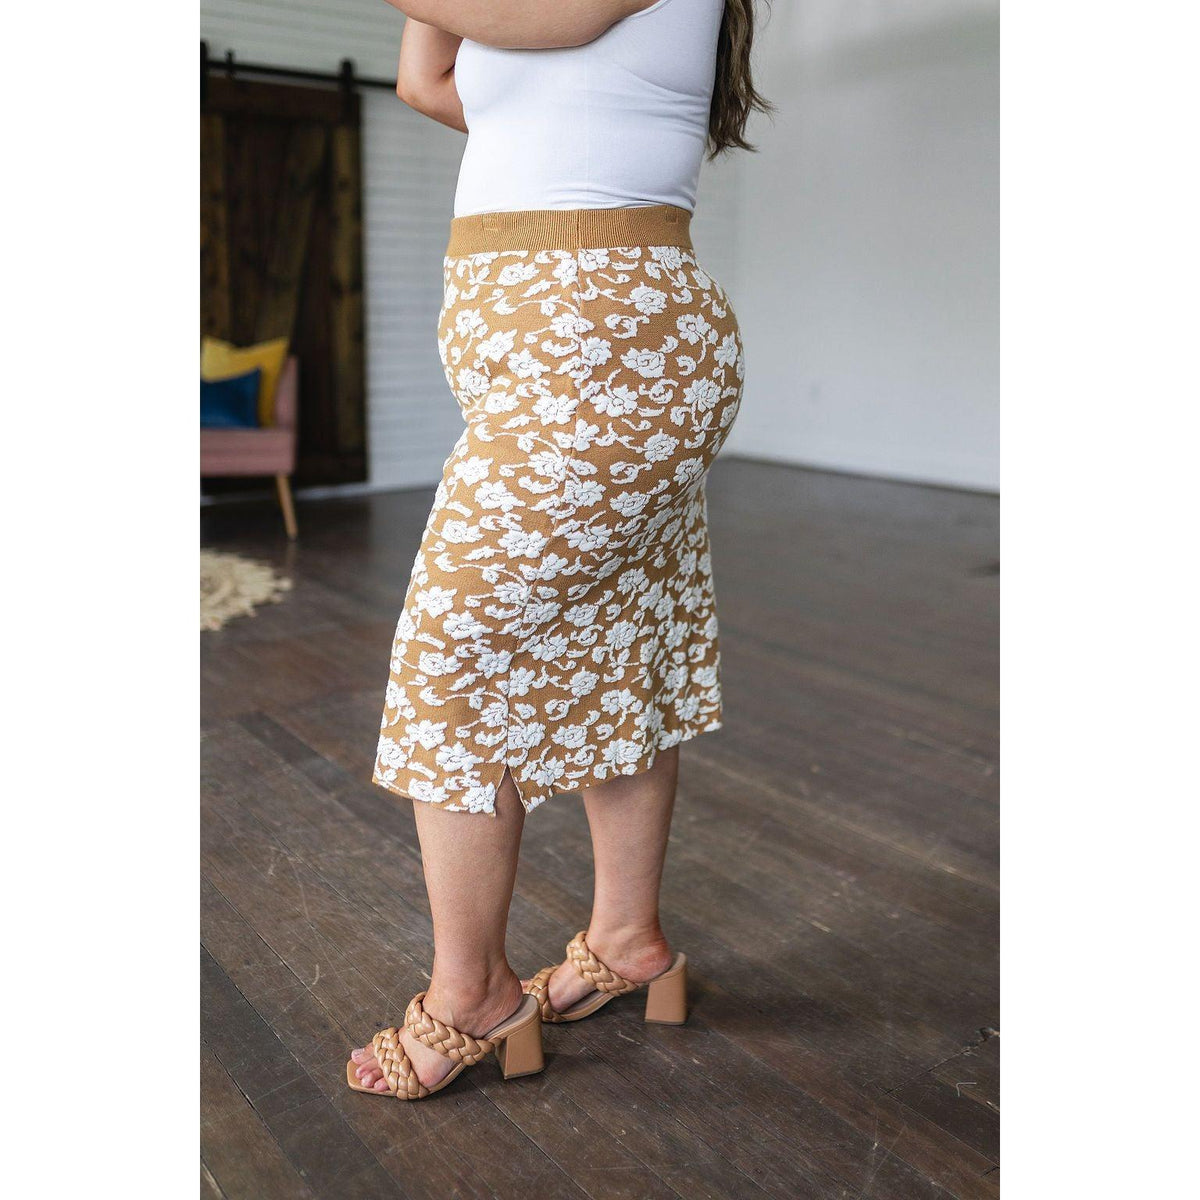 Kiss From a Rose Knit Pencil Skirt - becauseofadi